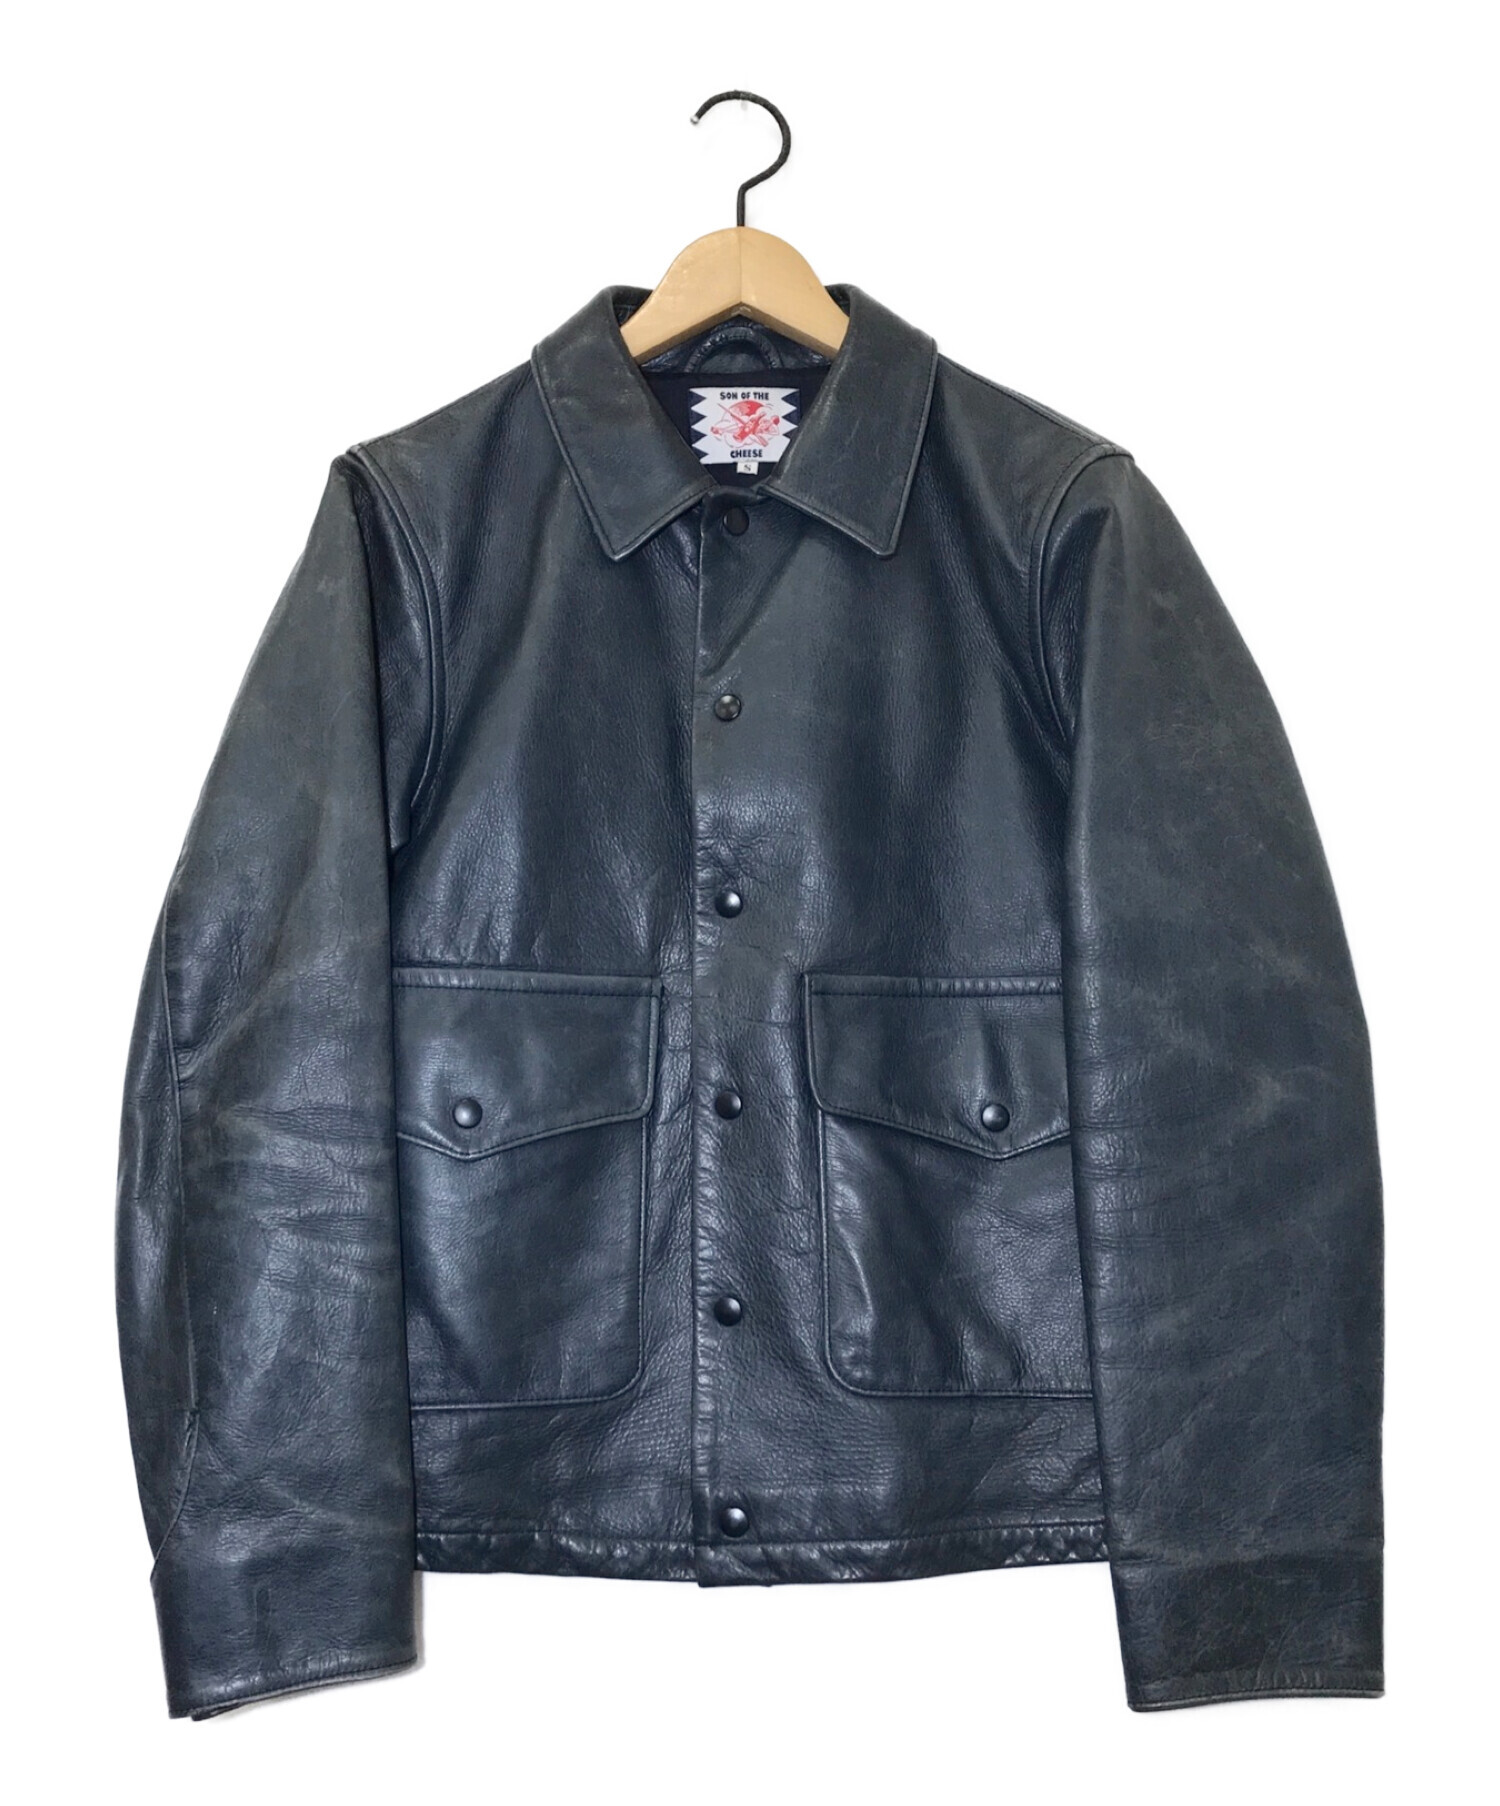 son of the cheese A-2 all leather jacket | www.fleettracktz.com